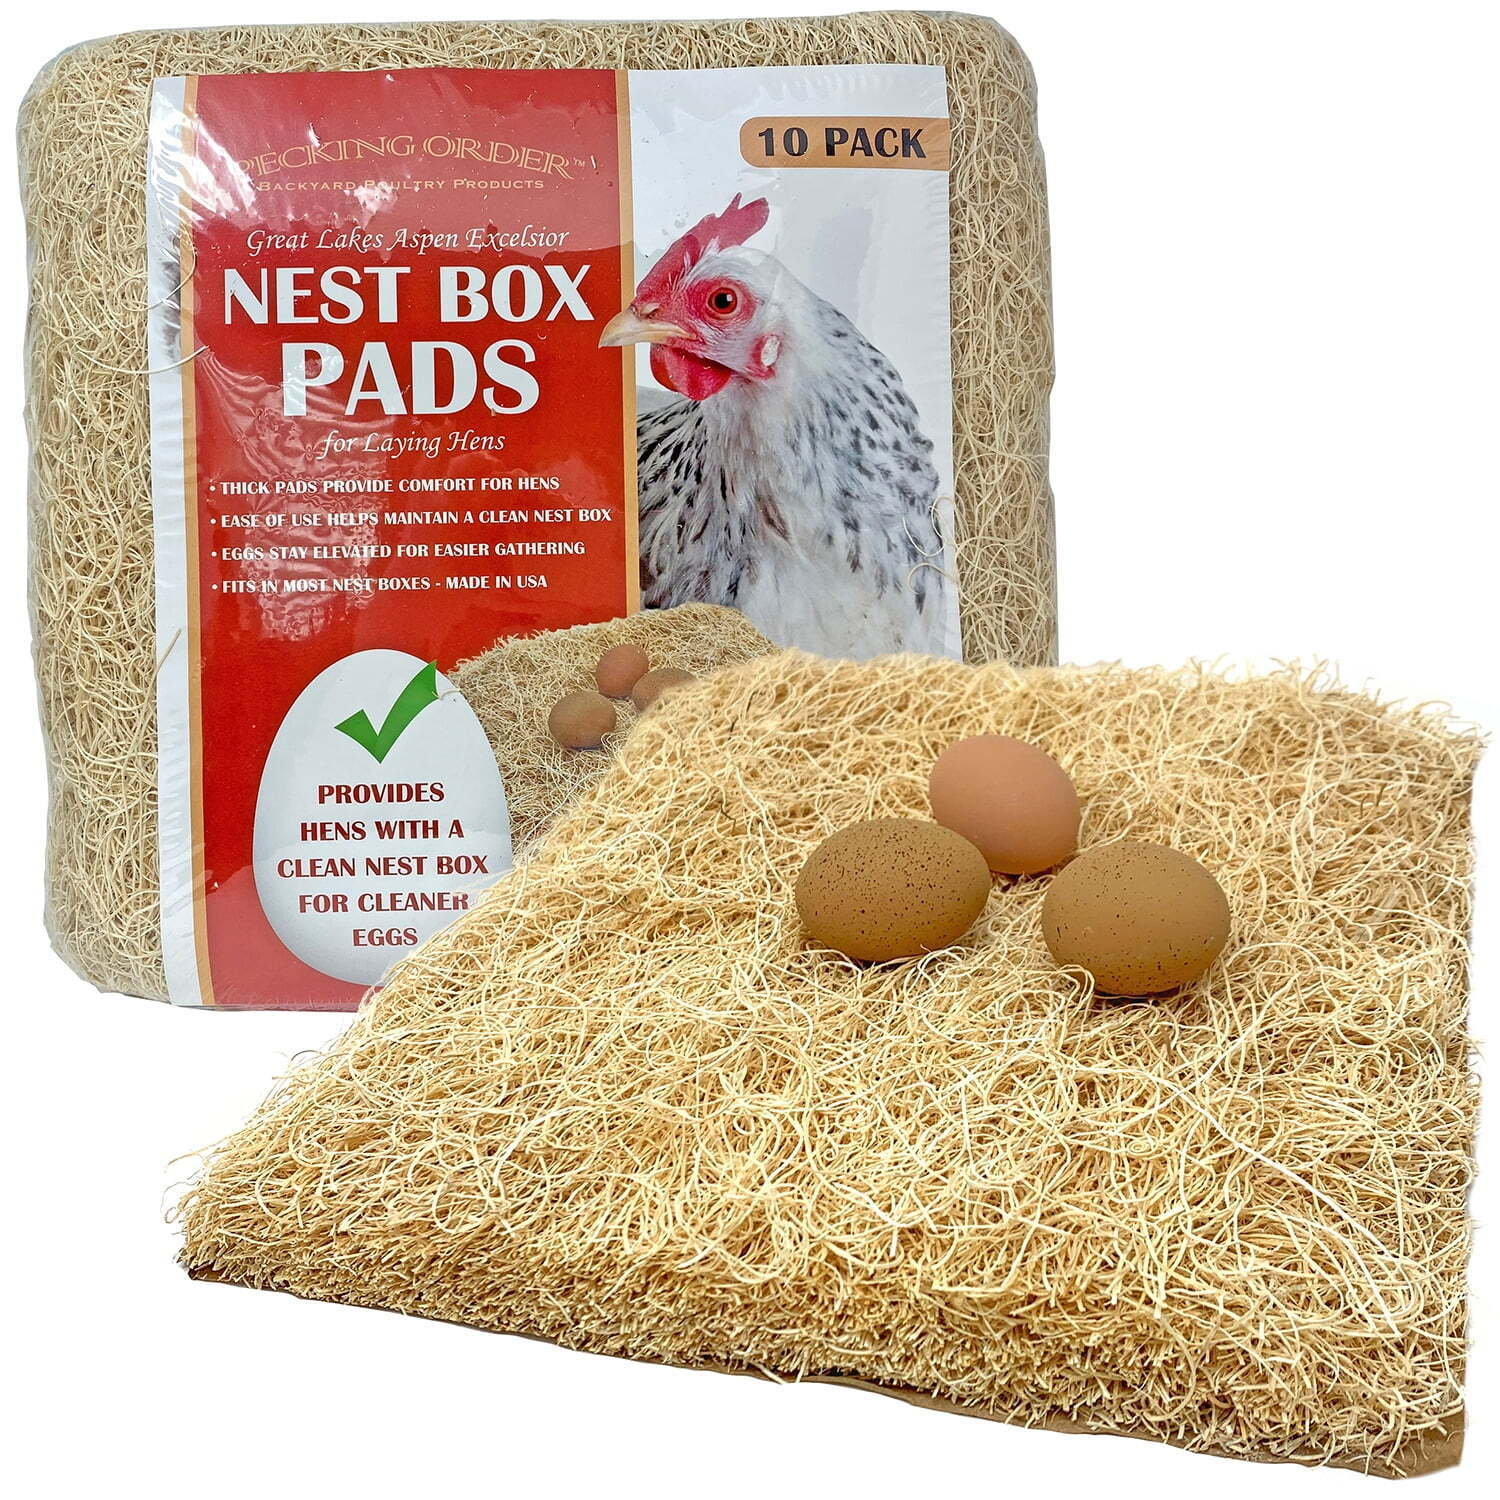 Chicken Nest Box Pads 10 Pack, Made with Great Lakes Aspen Excelsior Wood Fibers